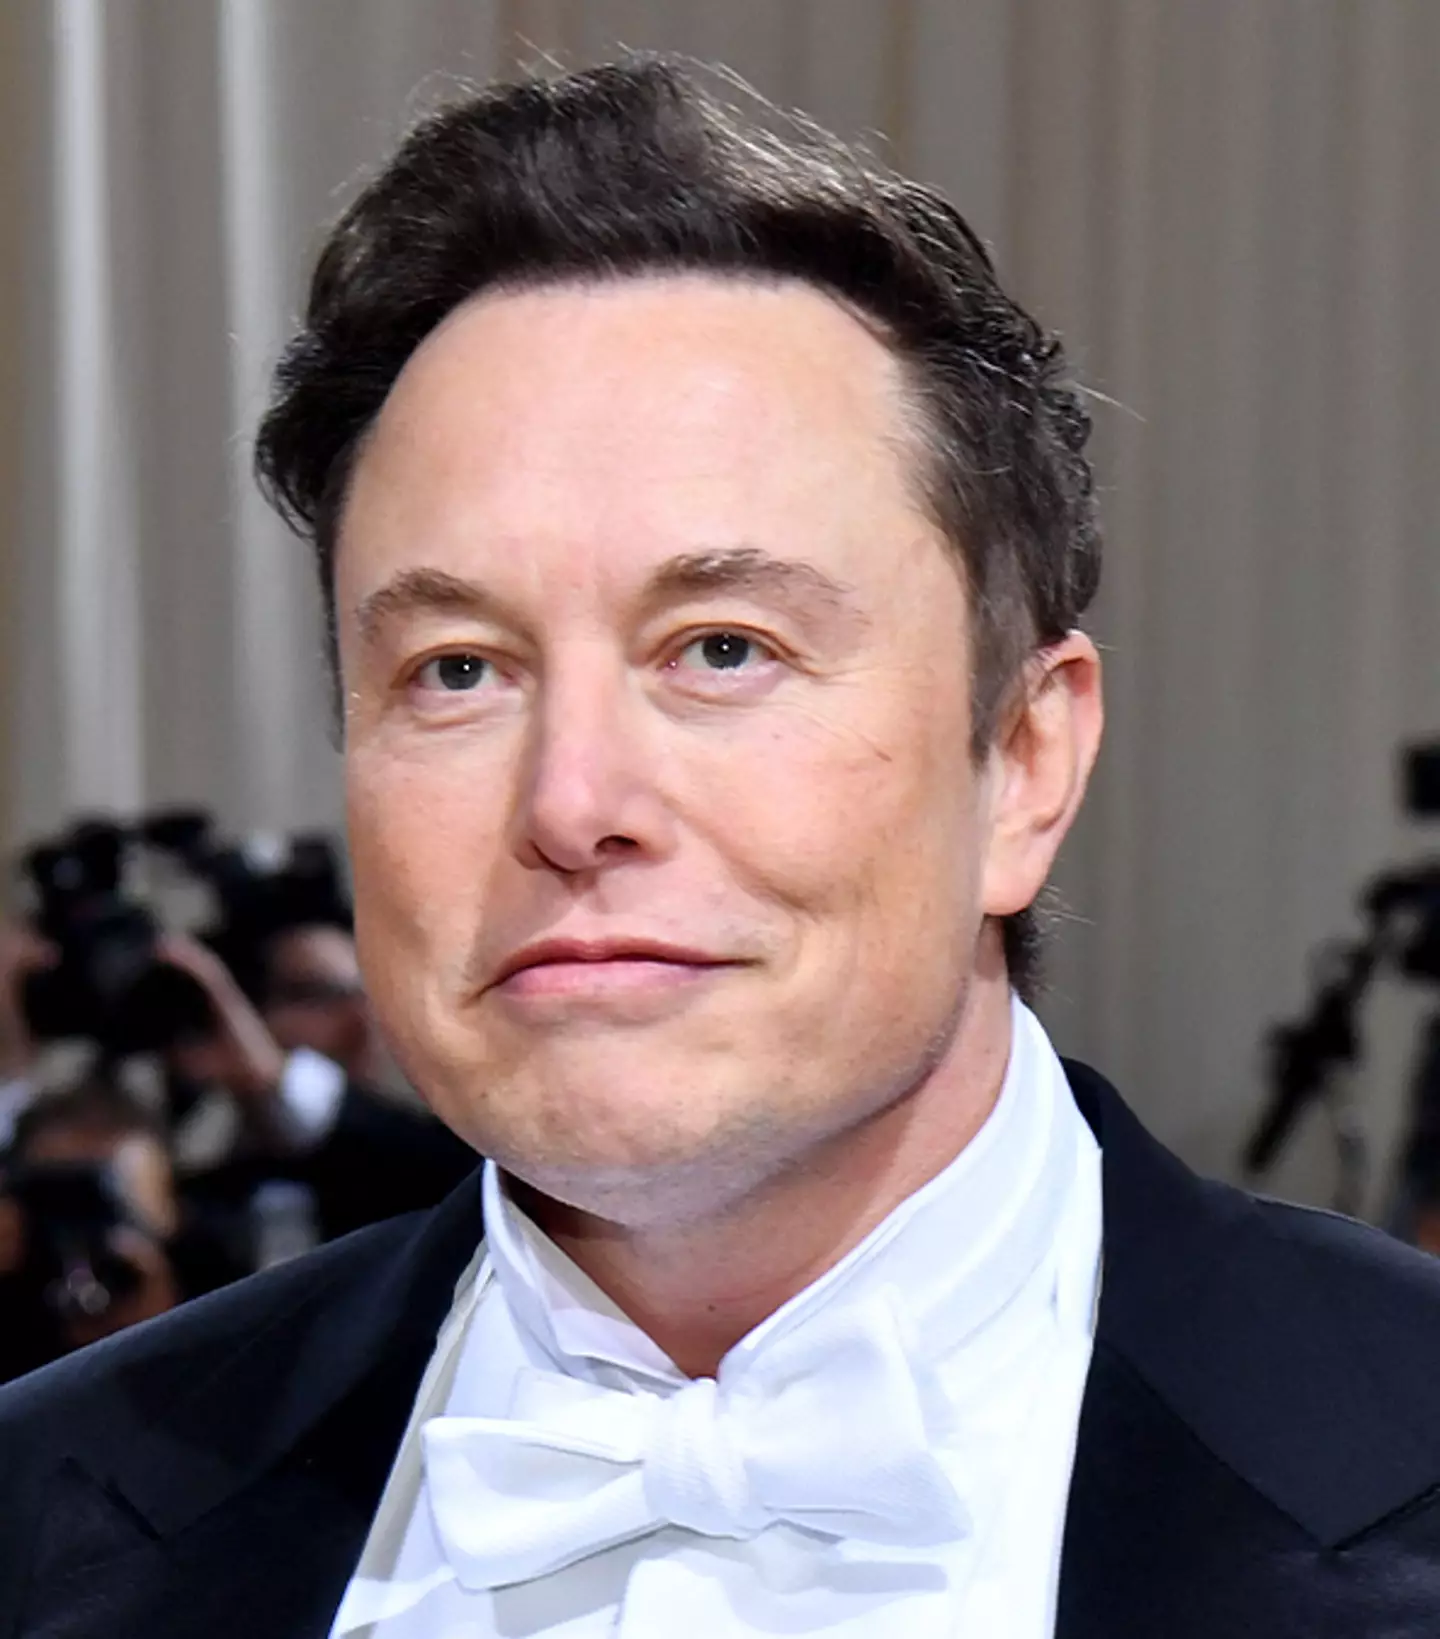 Elon Musk has responded to posts about staff and salaries/ ANGELA WEISS / Contributor / Getty